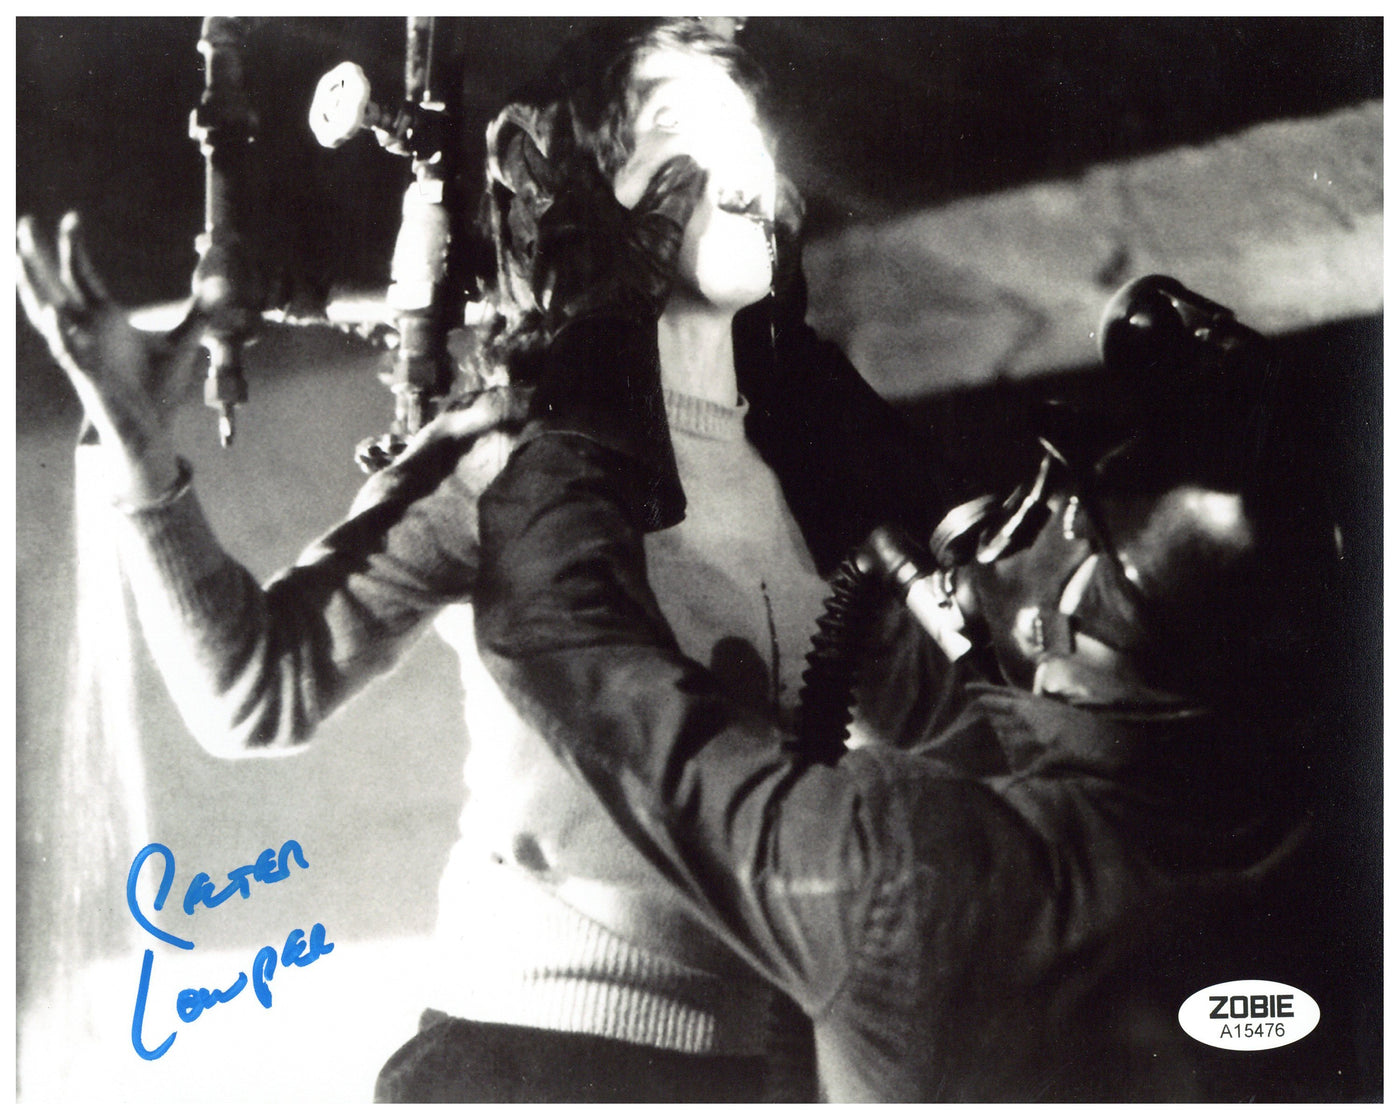 Peter Cowper Signed 8x10 Photo My Bloody Valentine The Miner Autographed JSA COA 4